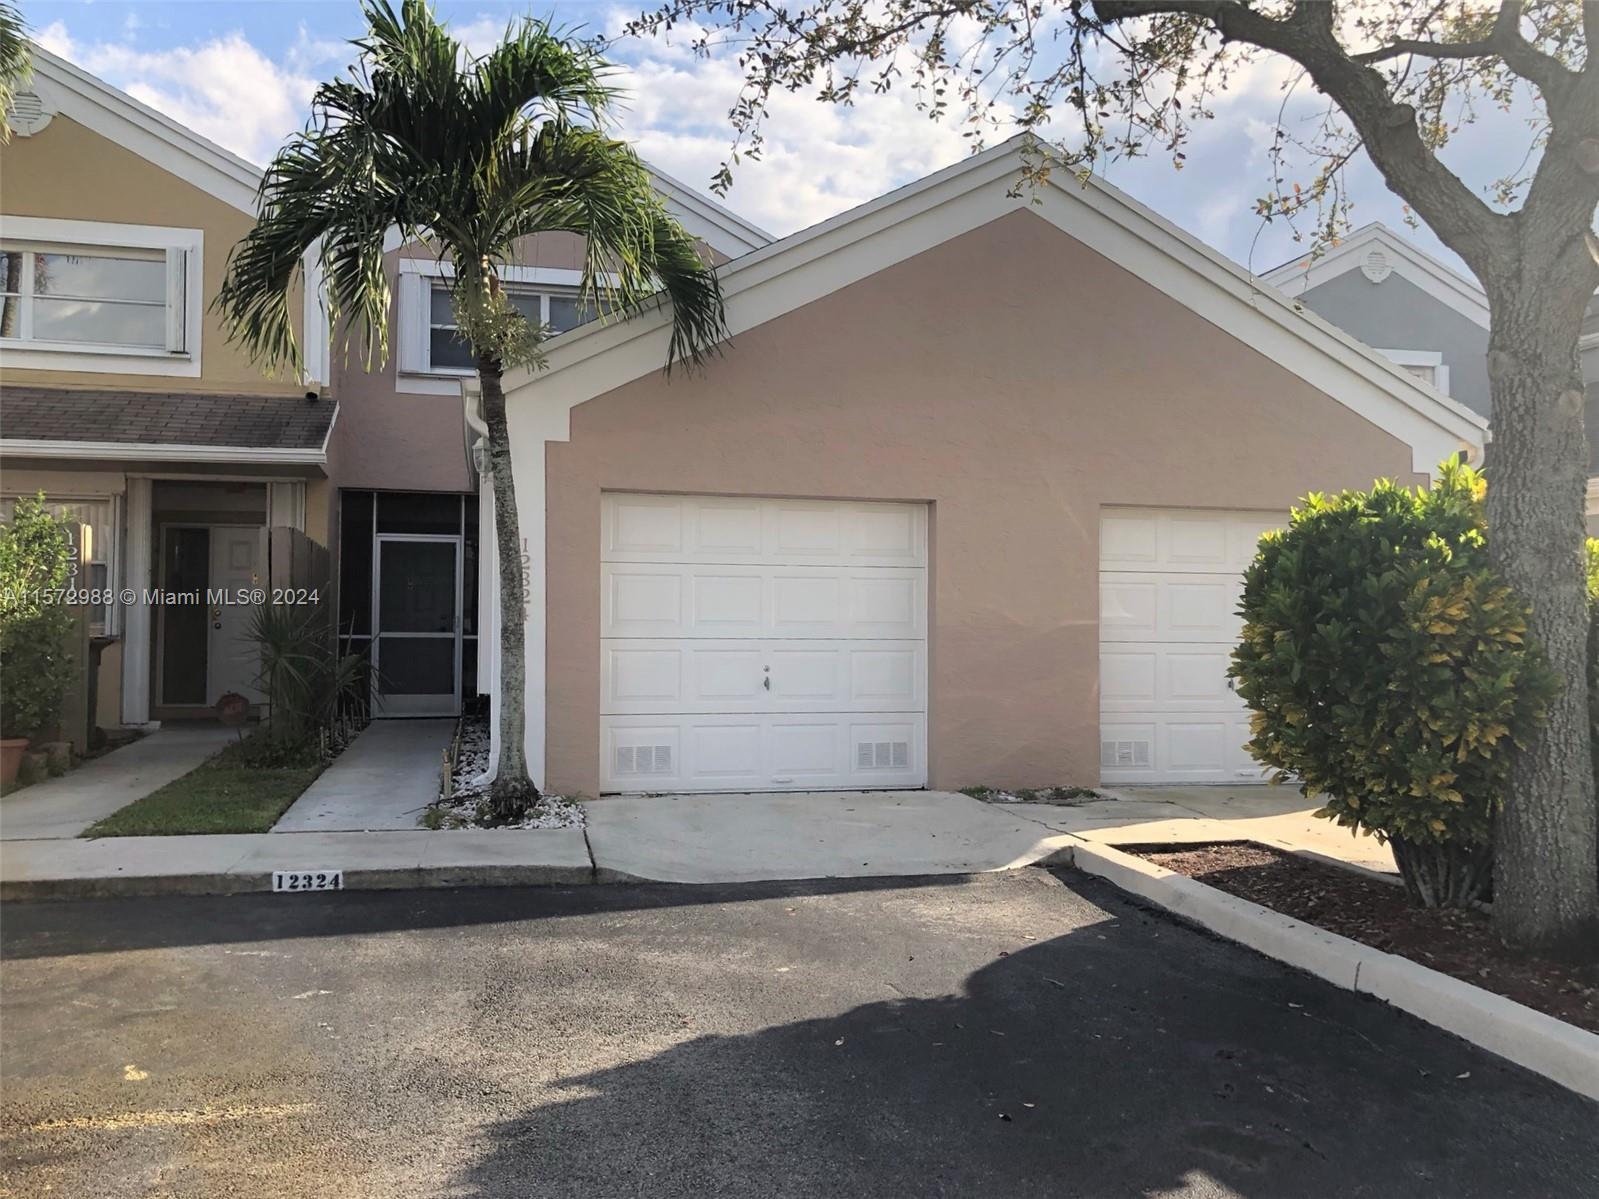 Photo of 12324 NW 14th St in Pembroke Pines, FL